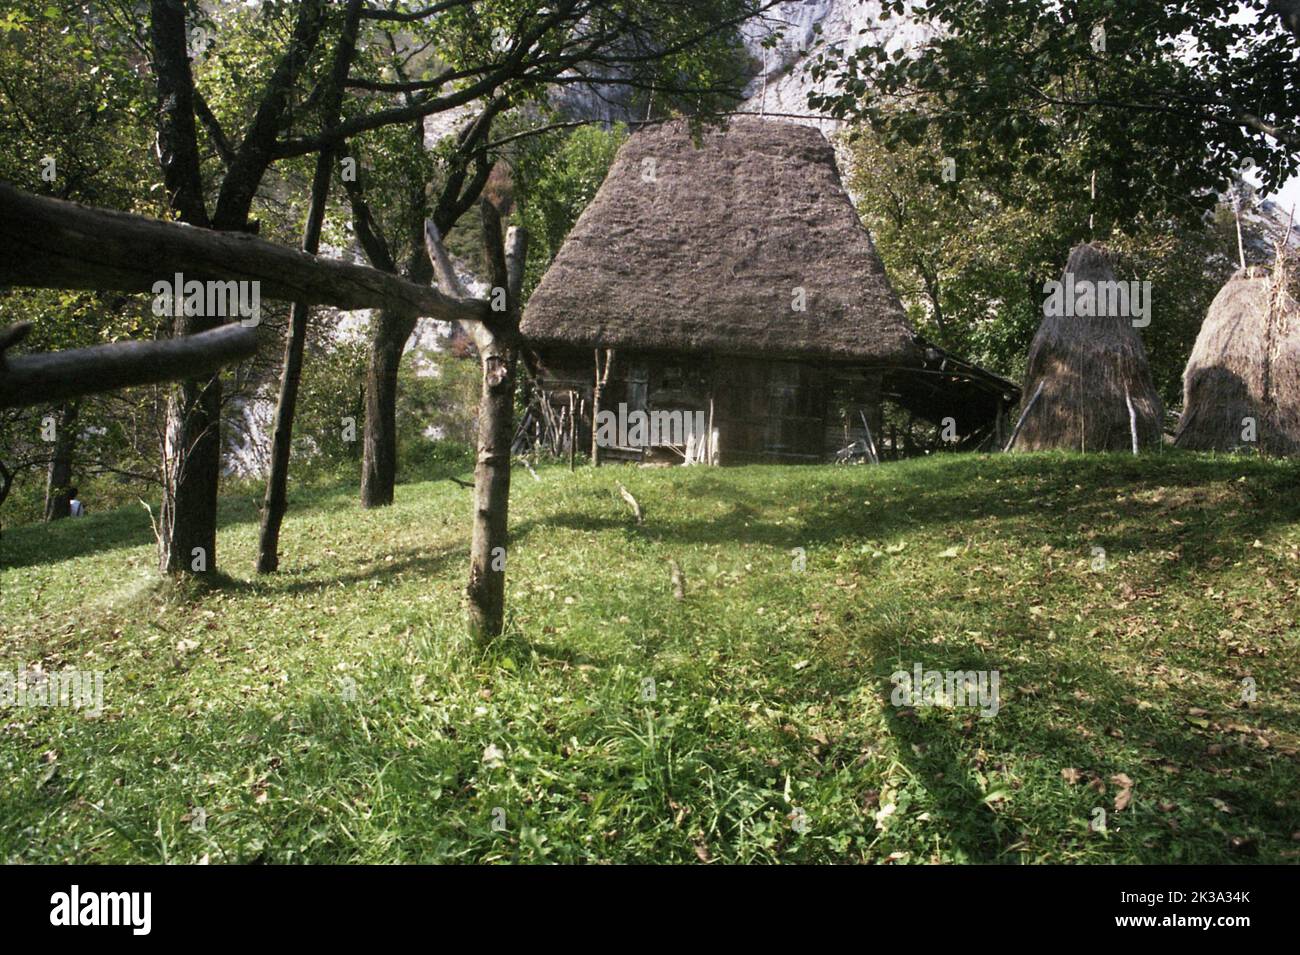 Alba County, Romania, approx. 1999. Traditional thatched straw roof shed in the Apuseni Mountains and hay stacks. Stock Photo